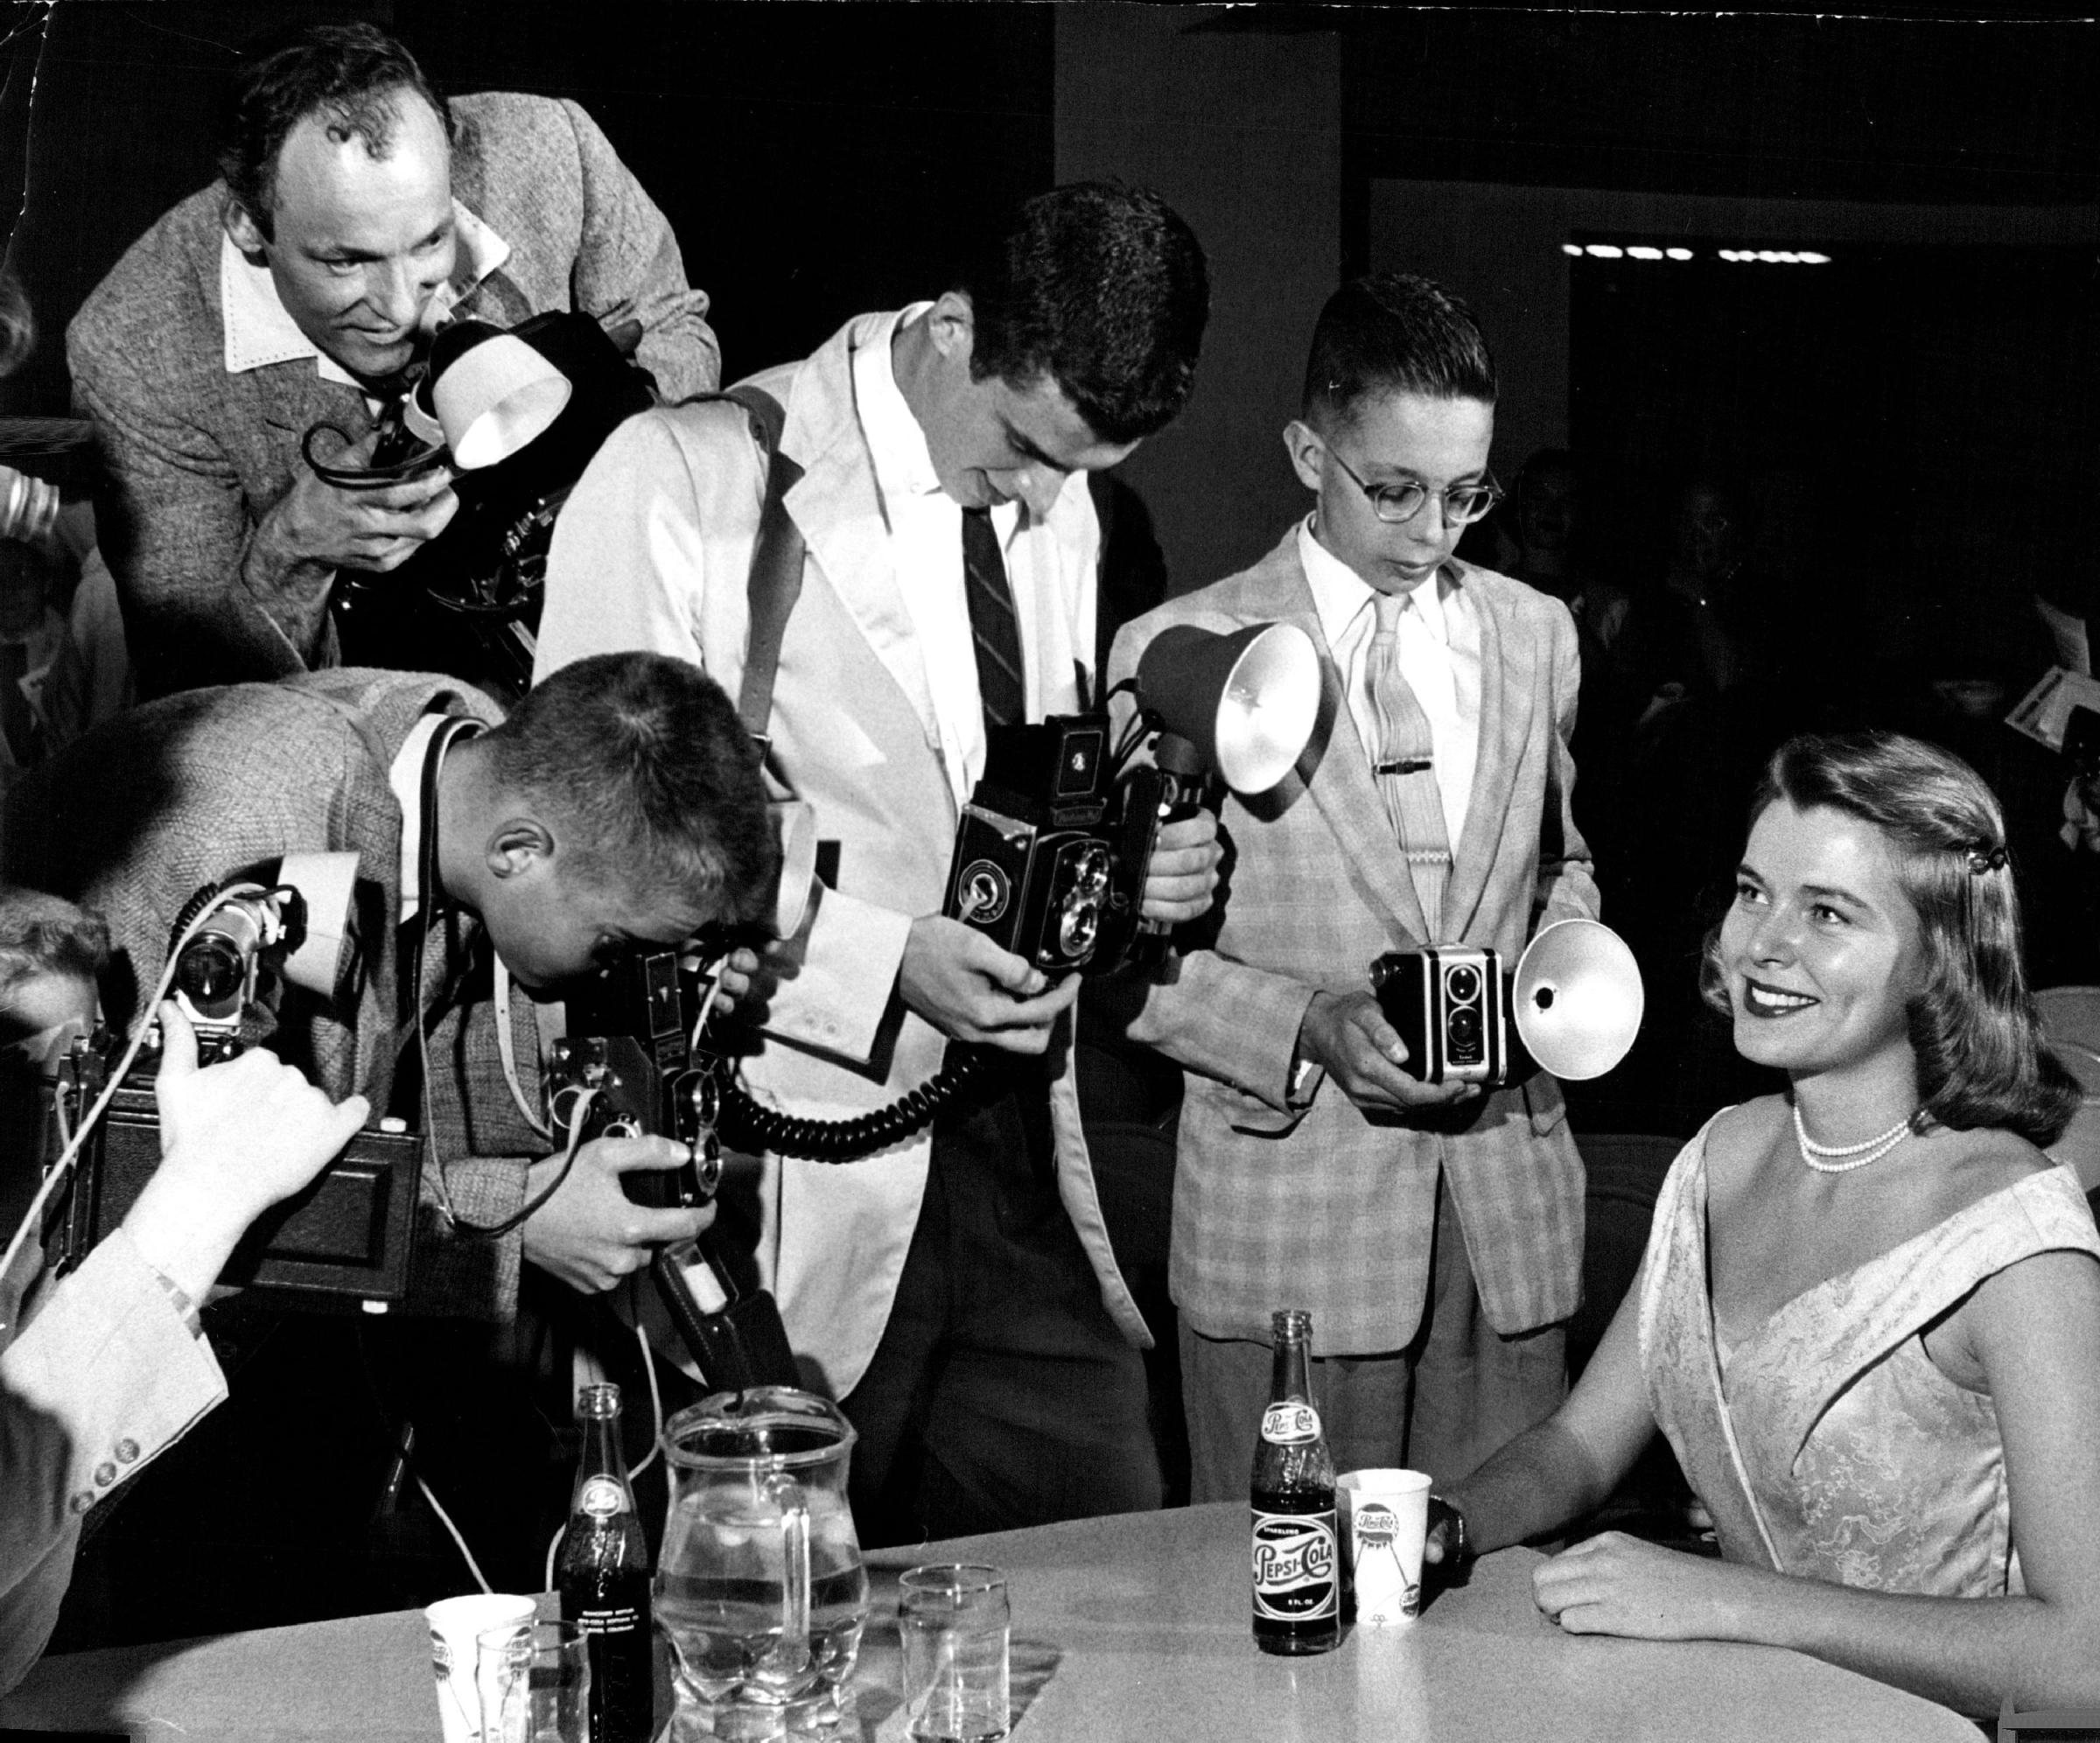 OCT 30 1957, OCT 31 1957; Young photographers got the chance of a lifetime when Miss America, Marily